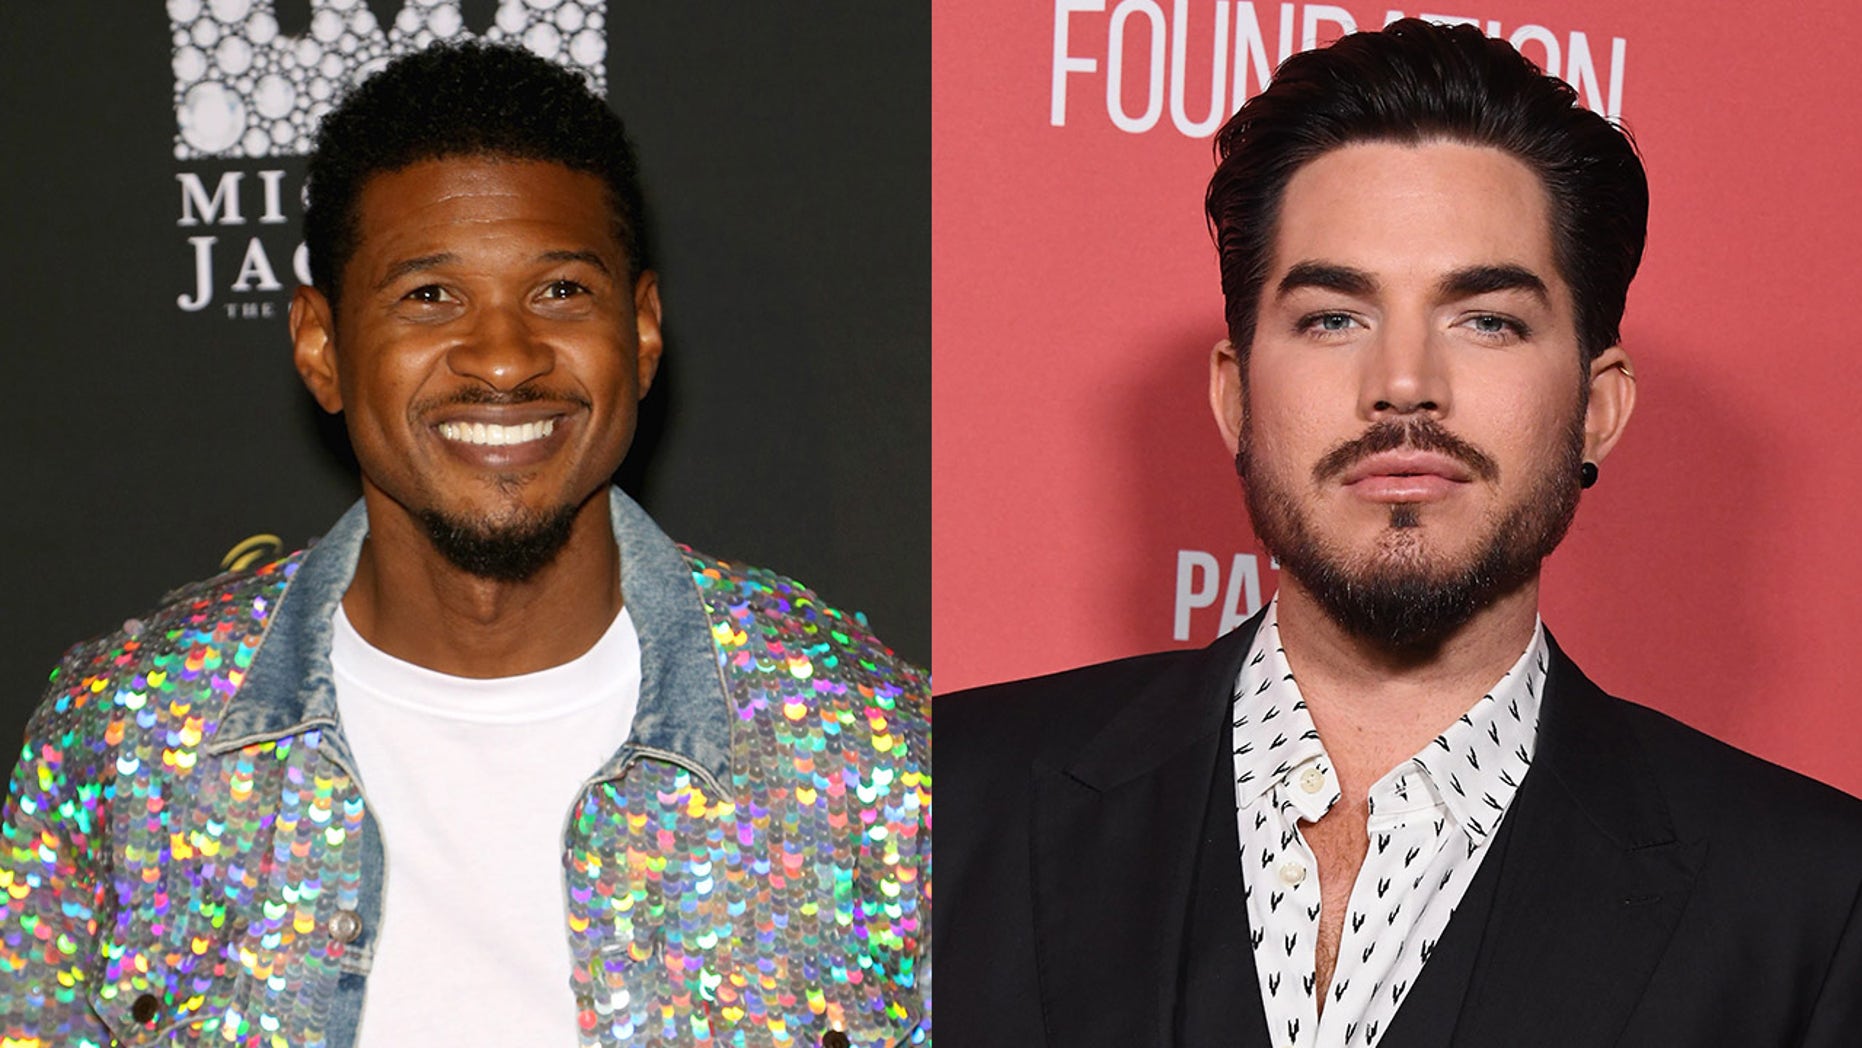 Los Angeles police make arrest in burglaries of Hollywood Hills homes including stars Usher and Adam Lambert